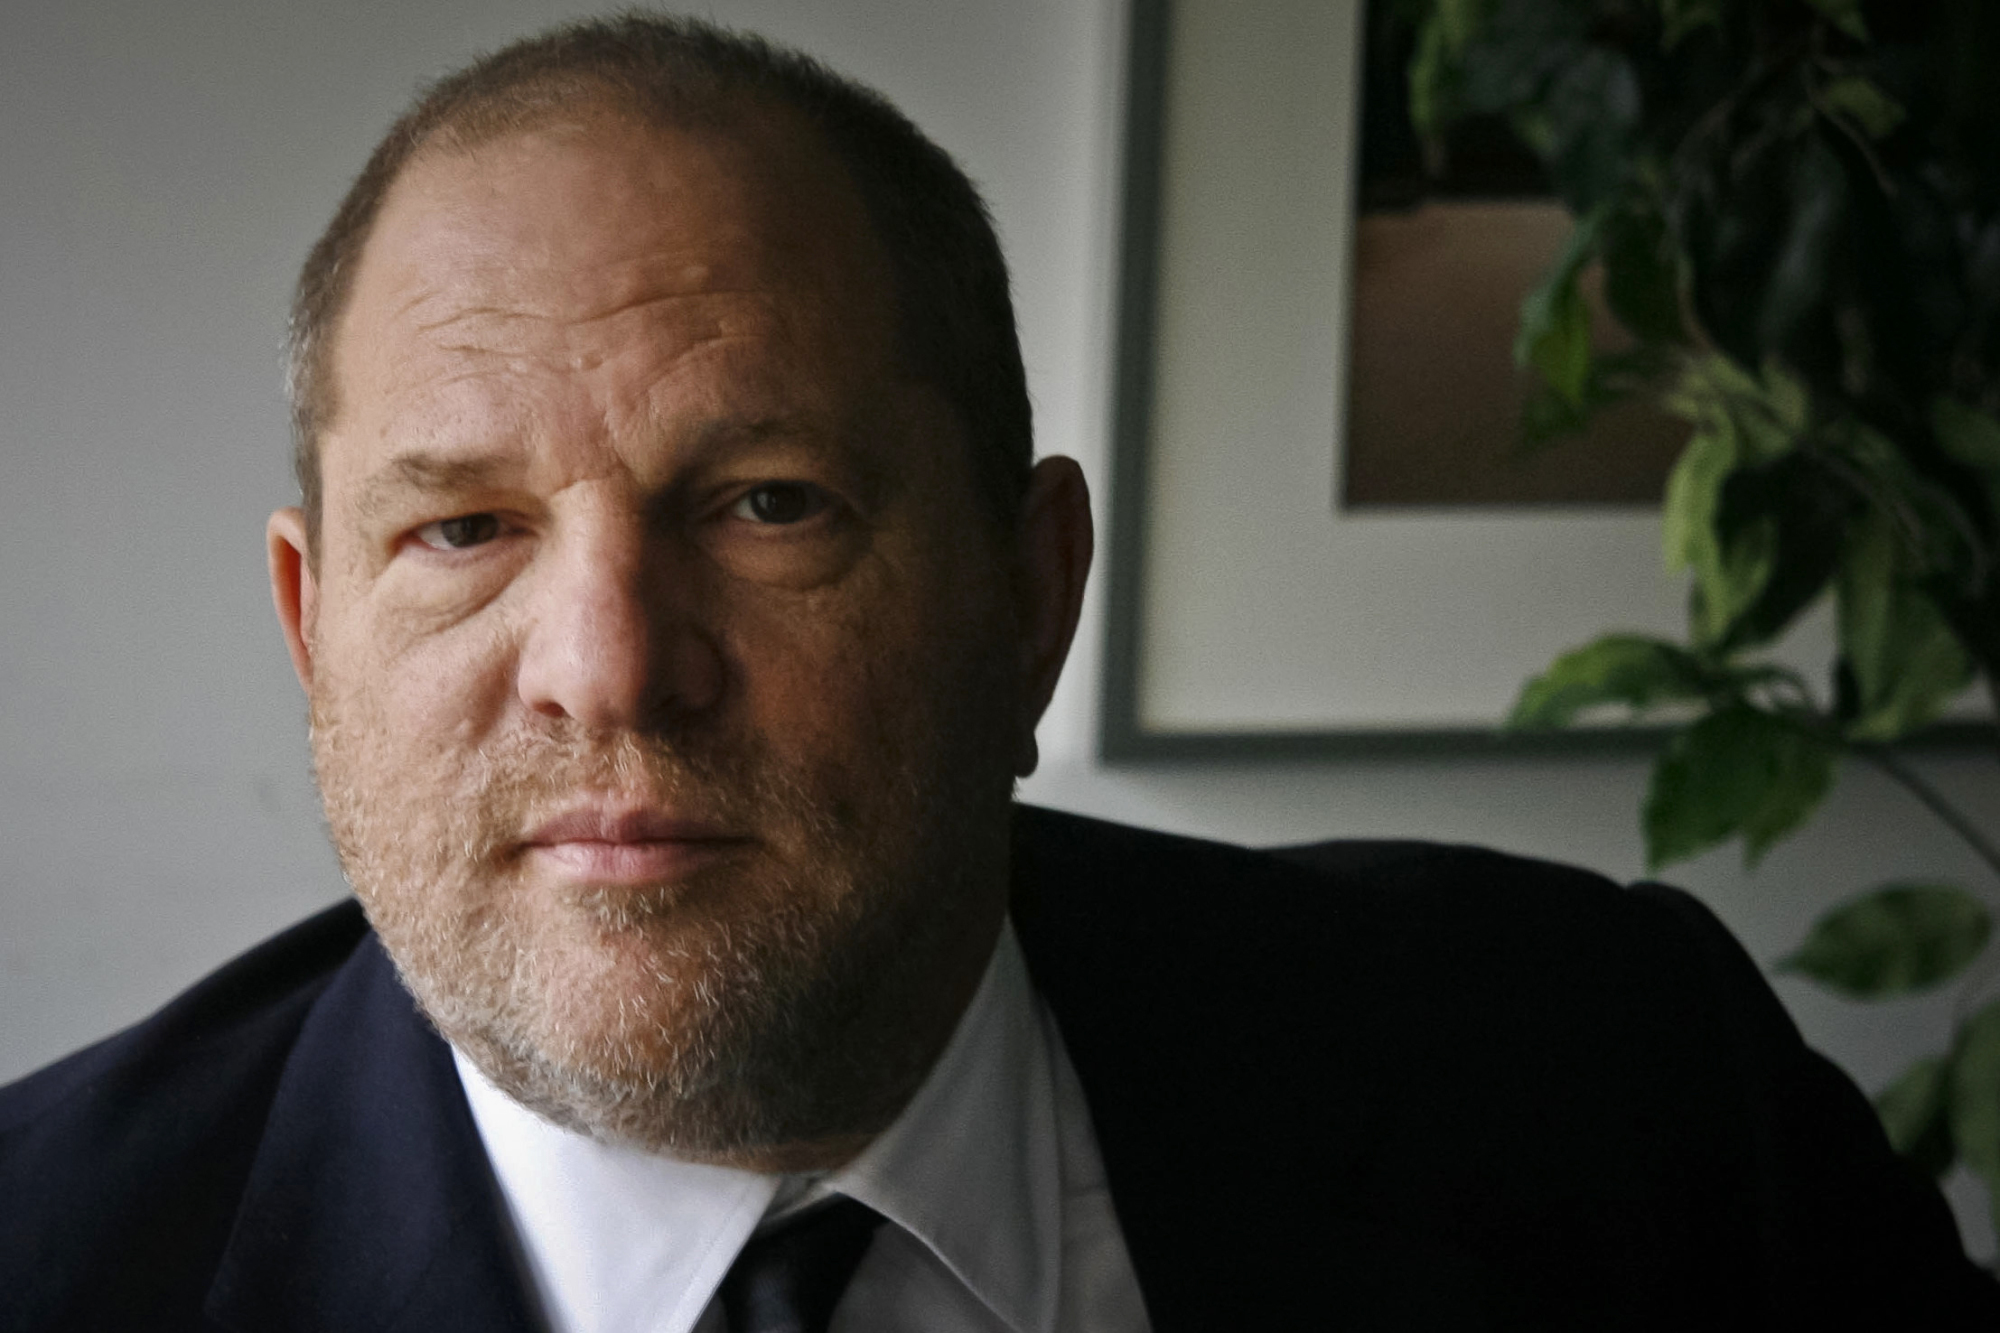 Film producer Harvey Weinstein poses for a photo in New York in 2011. The Weinstein Co.'s board of directors says the company, co-founded in 2005 by Harvey Weinstein, is expected to file for bankruptcy protection after last-ditch talks to sell its assets collapsed. | AP